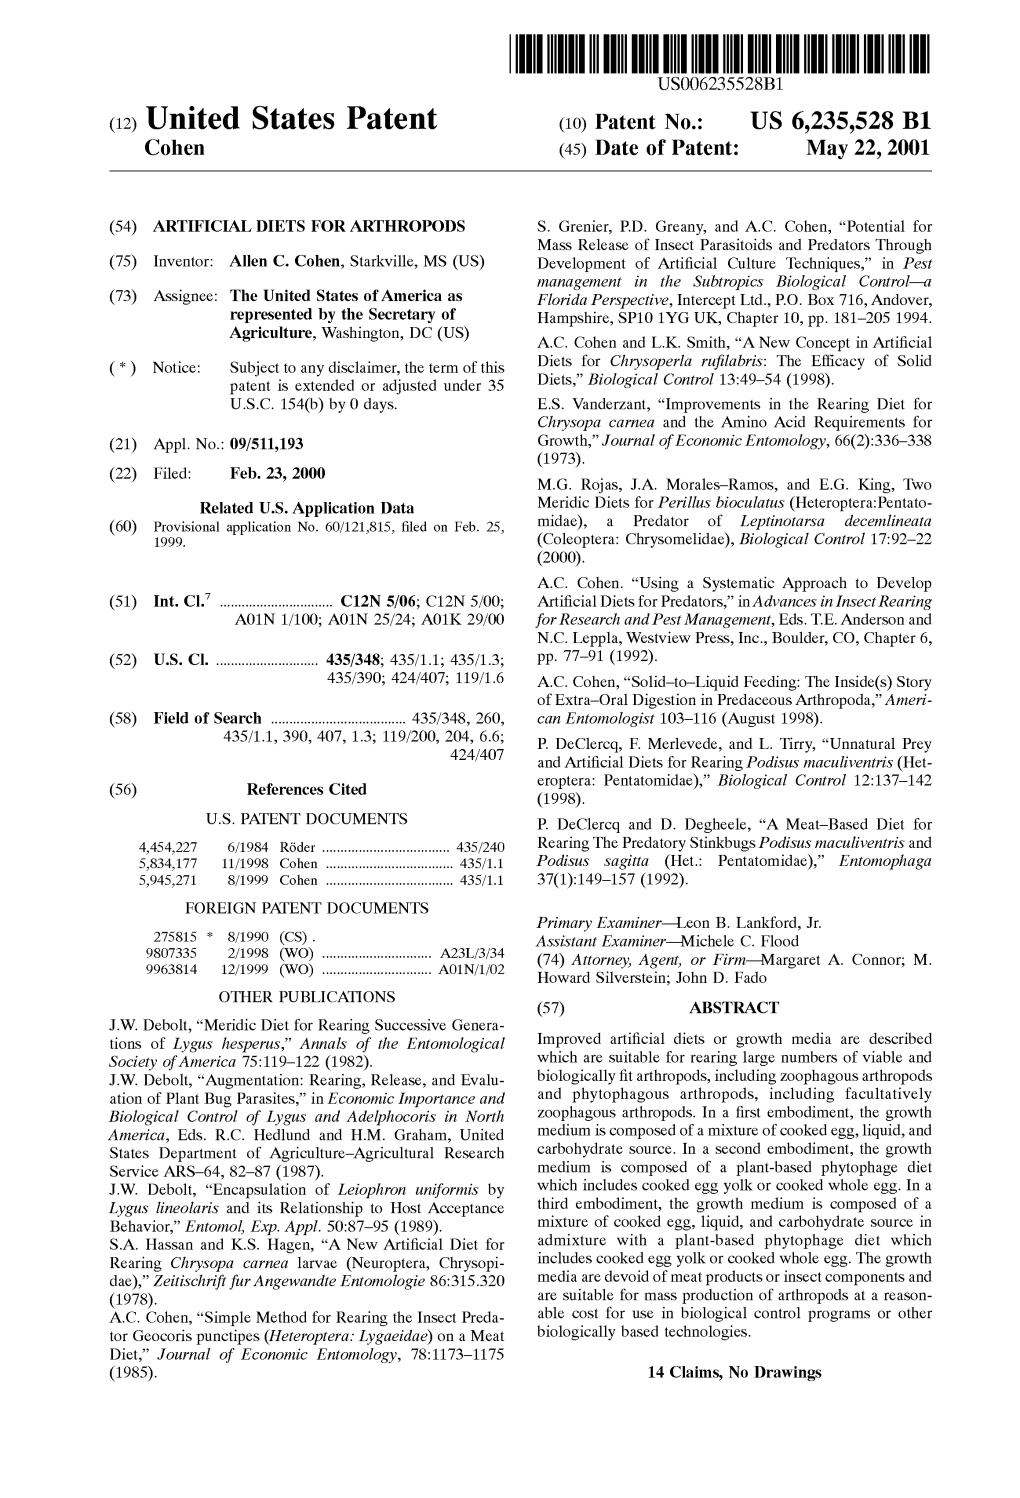 (12) United States Patent (10) Patent No.: US 6,235,528 B1 Cohen (45) Date of Patent: May 22, 2001